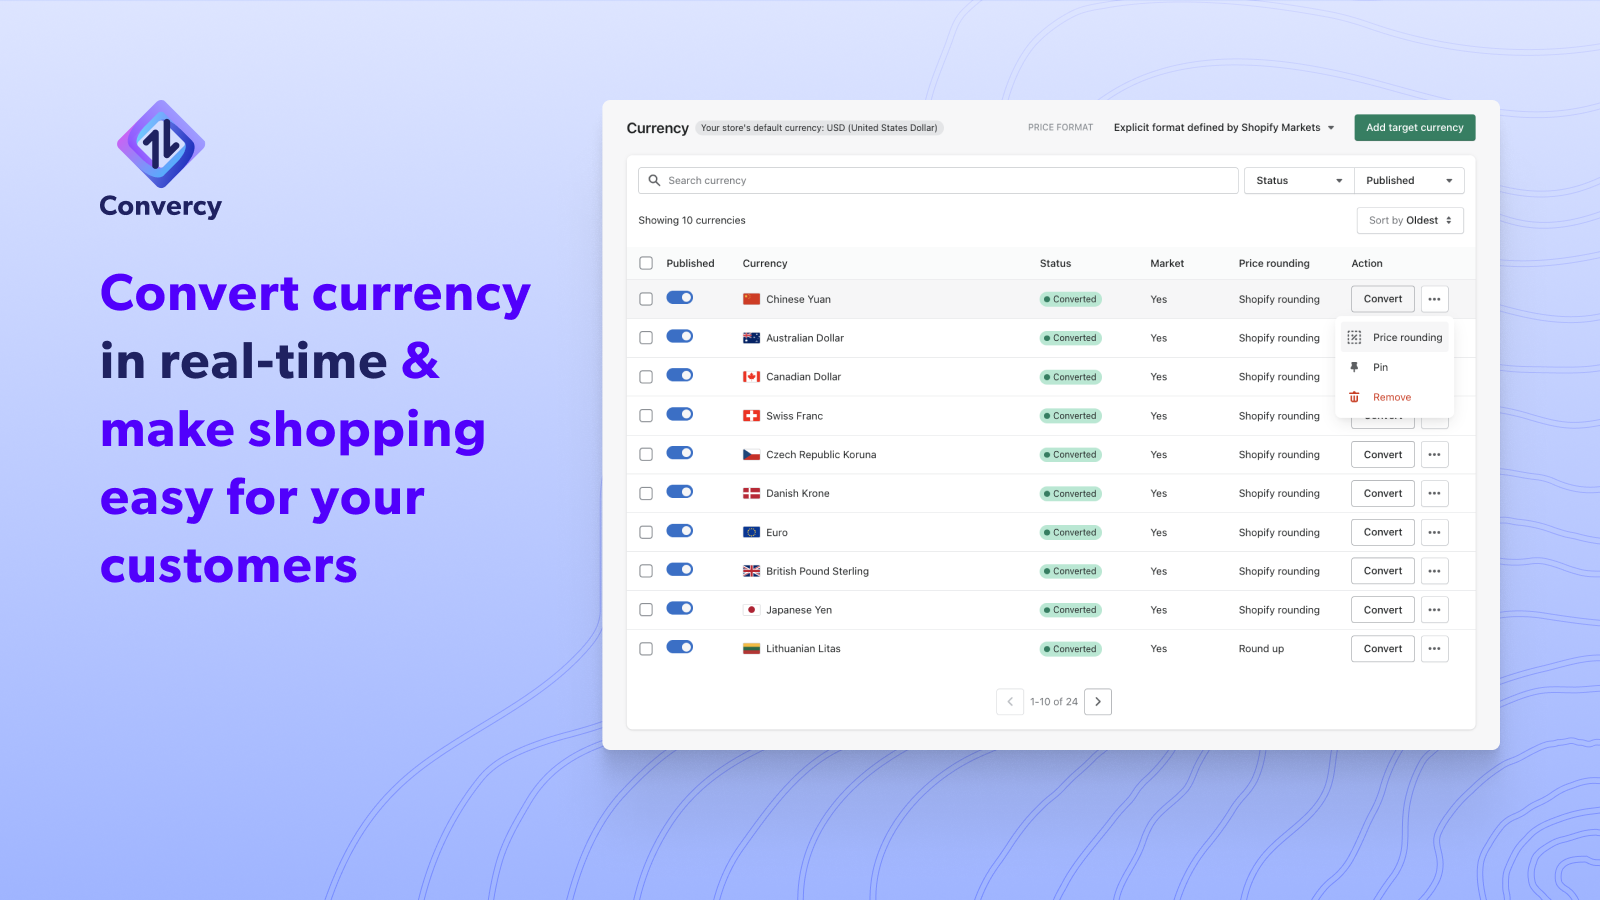 Convert currency in real-time & make shopping easy 